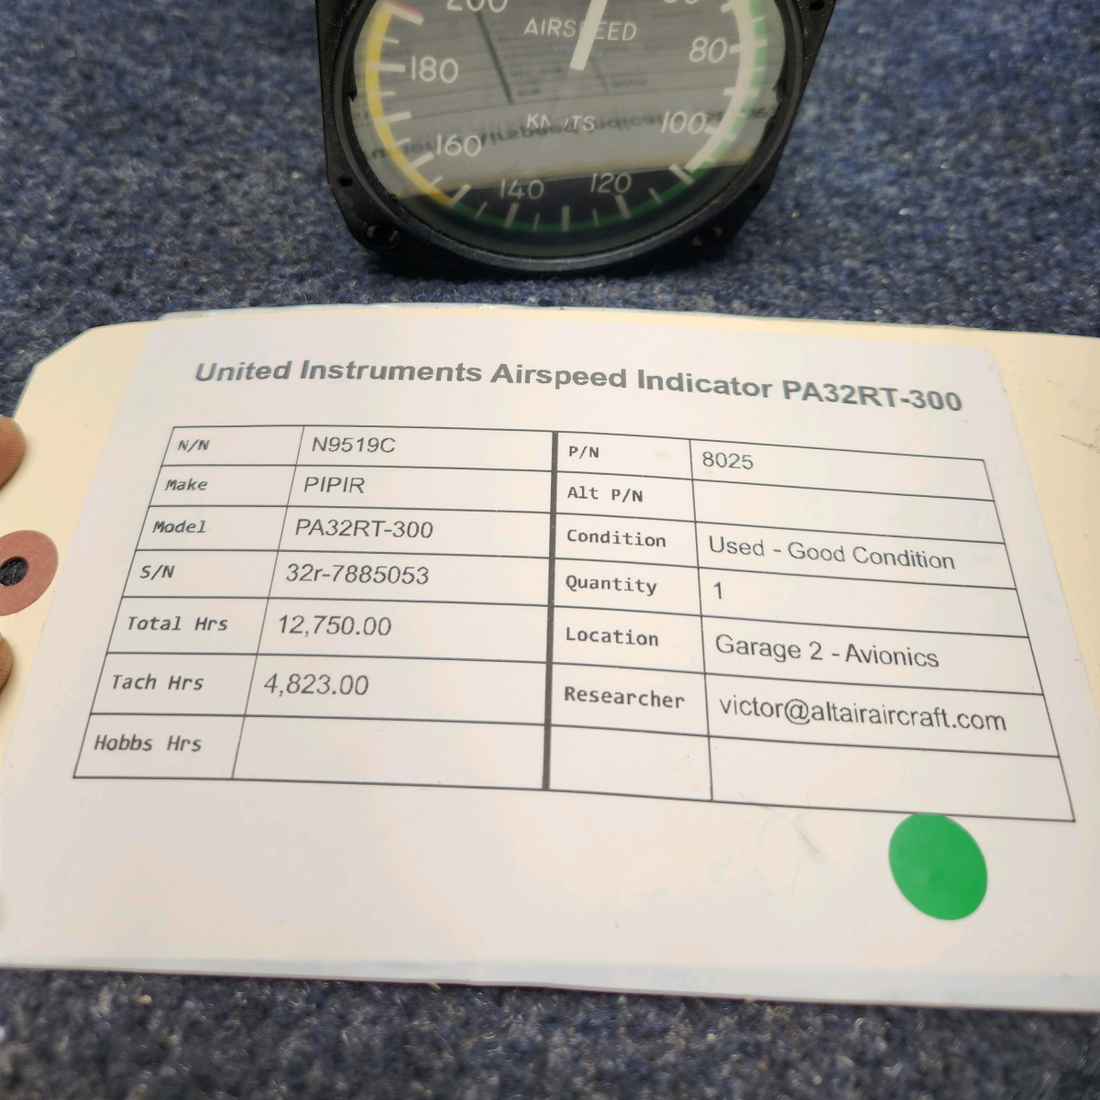 Used aircraft parts for sale, 8025 PIPIR PA32RT-300 UNITED INSTRUMENTS AIRSPEED INDICATOR PA32RT-300